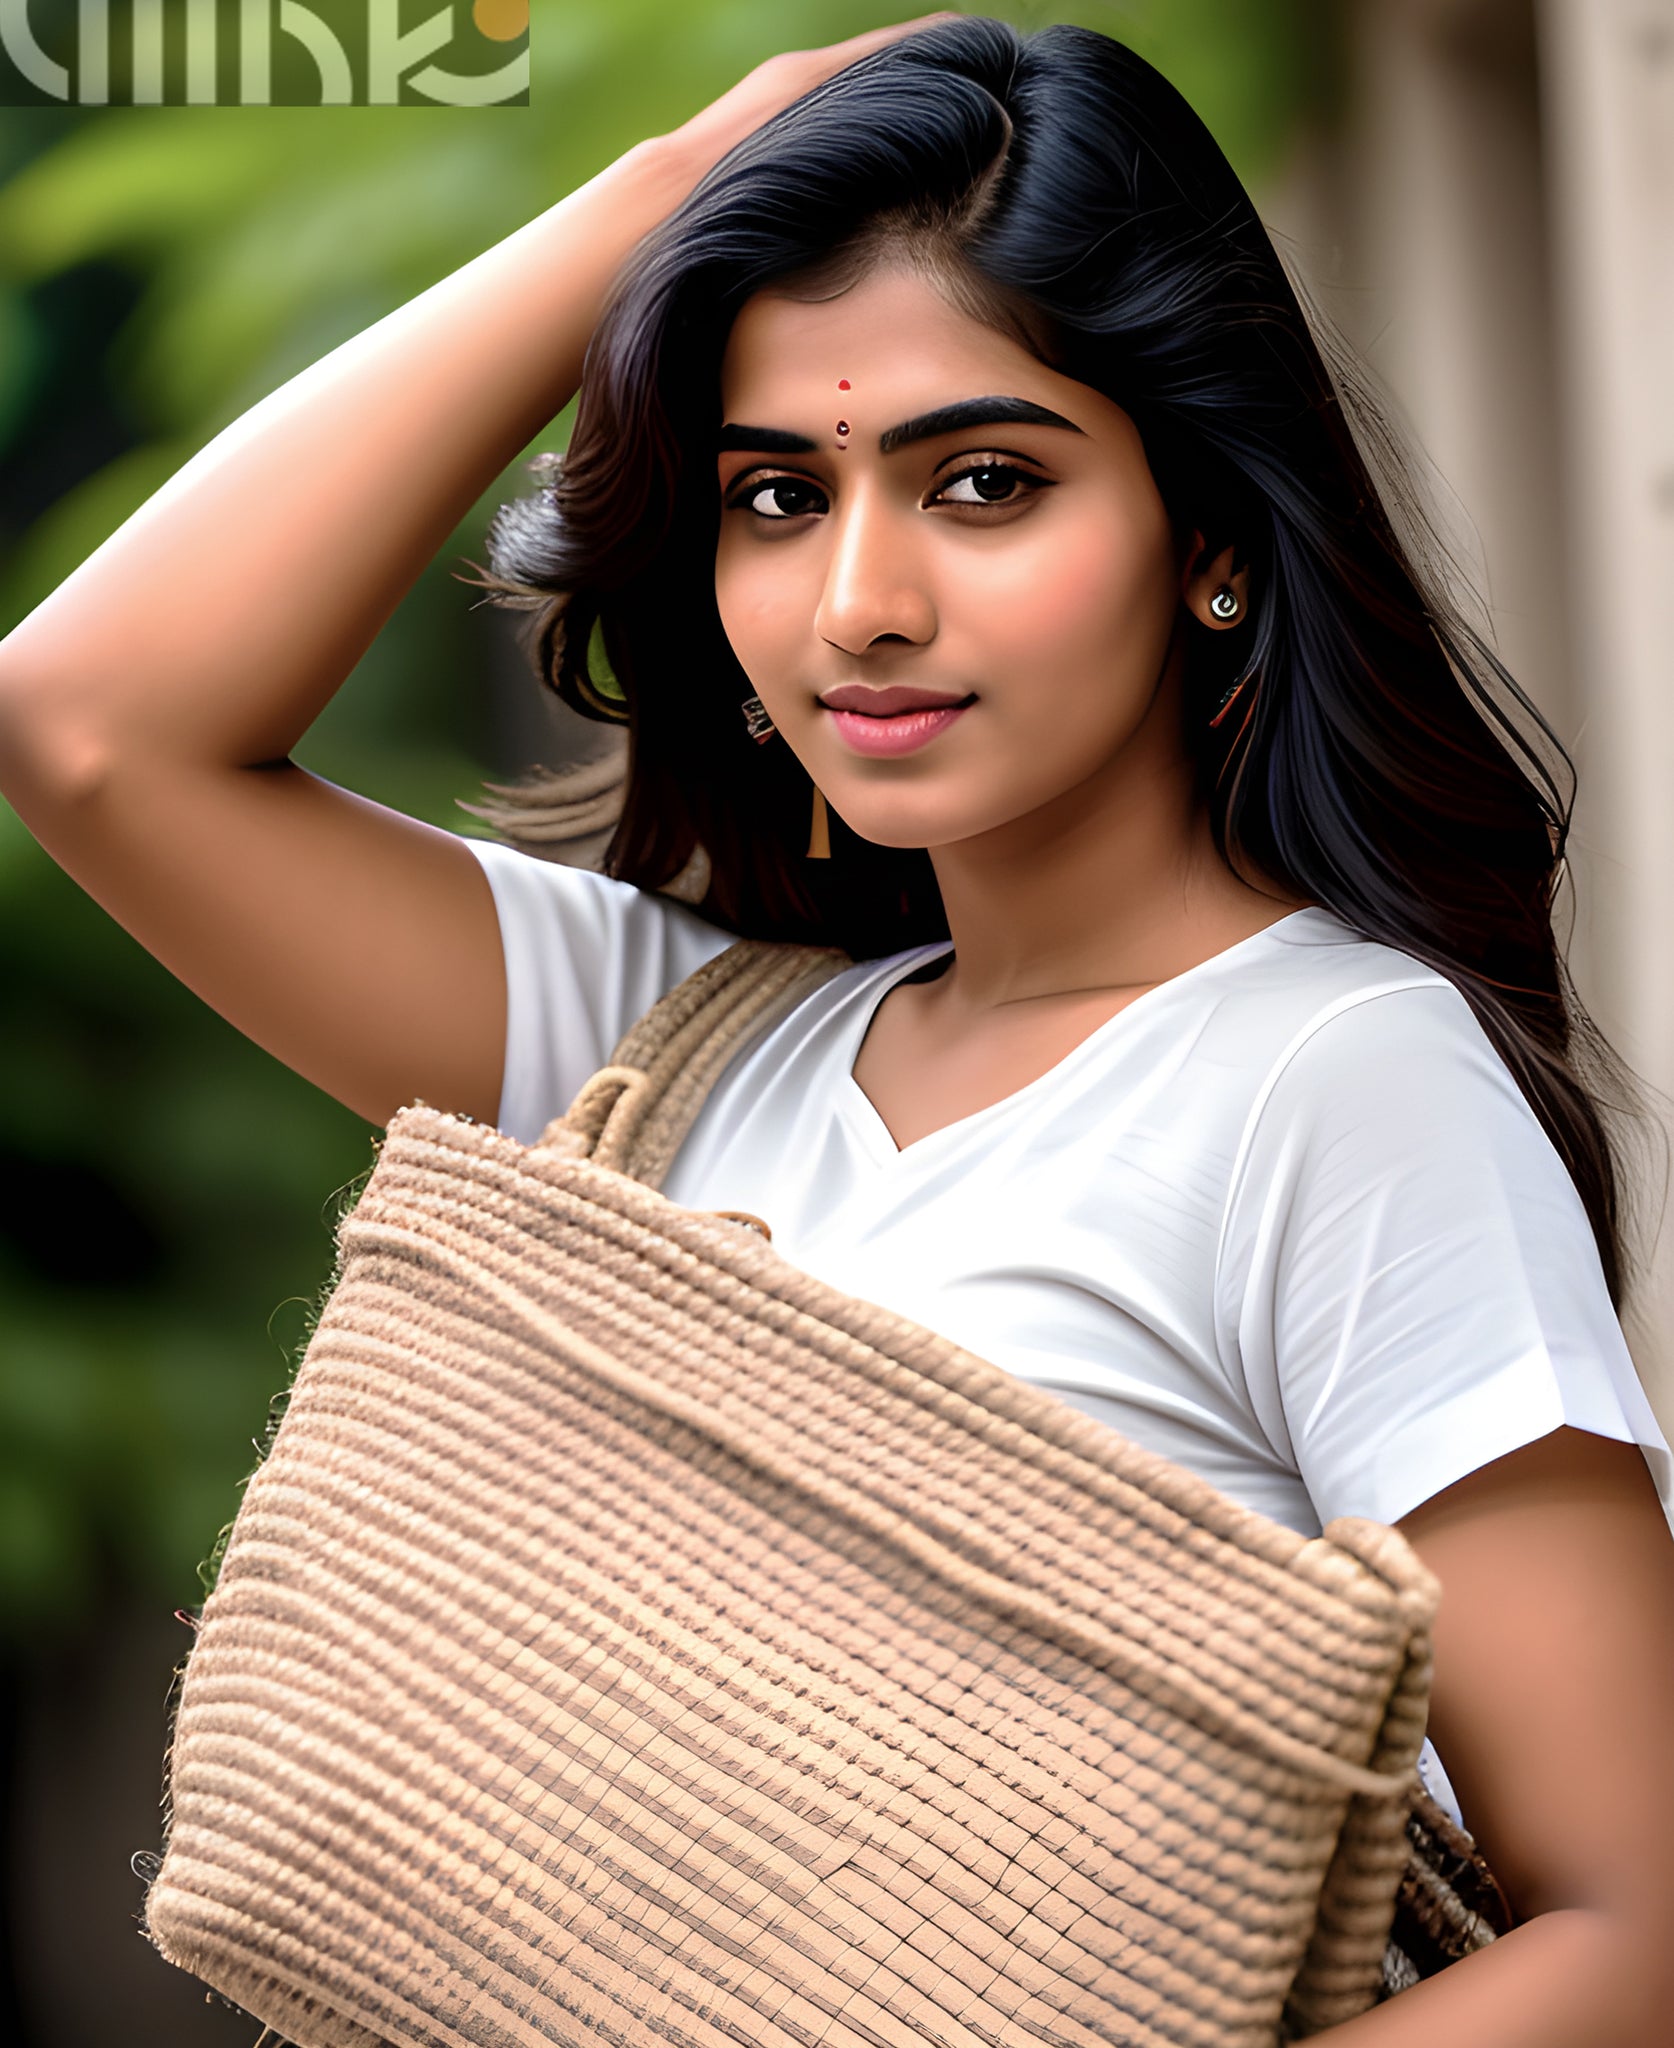 Jute Bags vs. The World: A Tote-ally Green Revolution